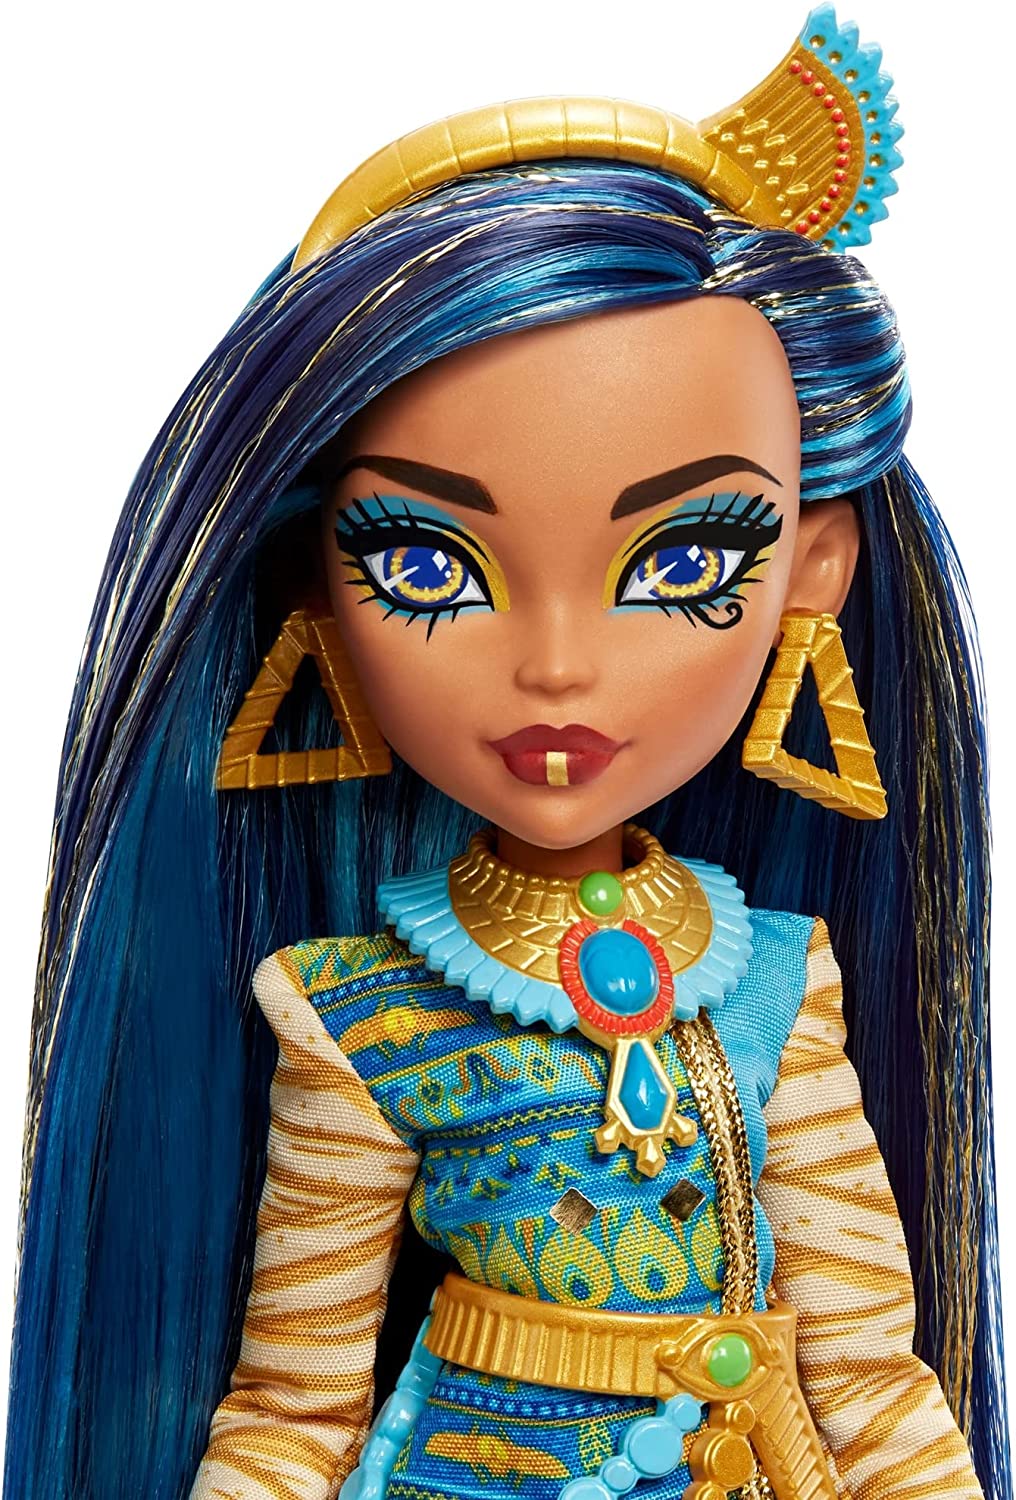 Monster High Cleo De Nile Doll with Pet Dog, Blue Streaked Hair